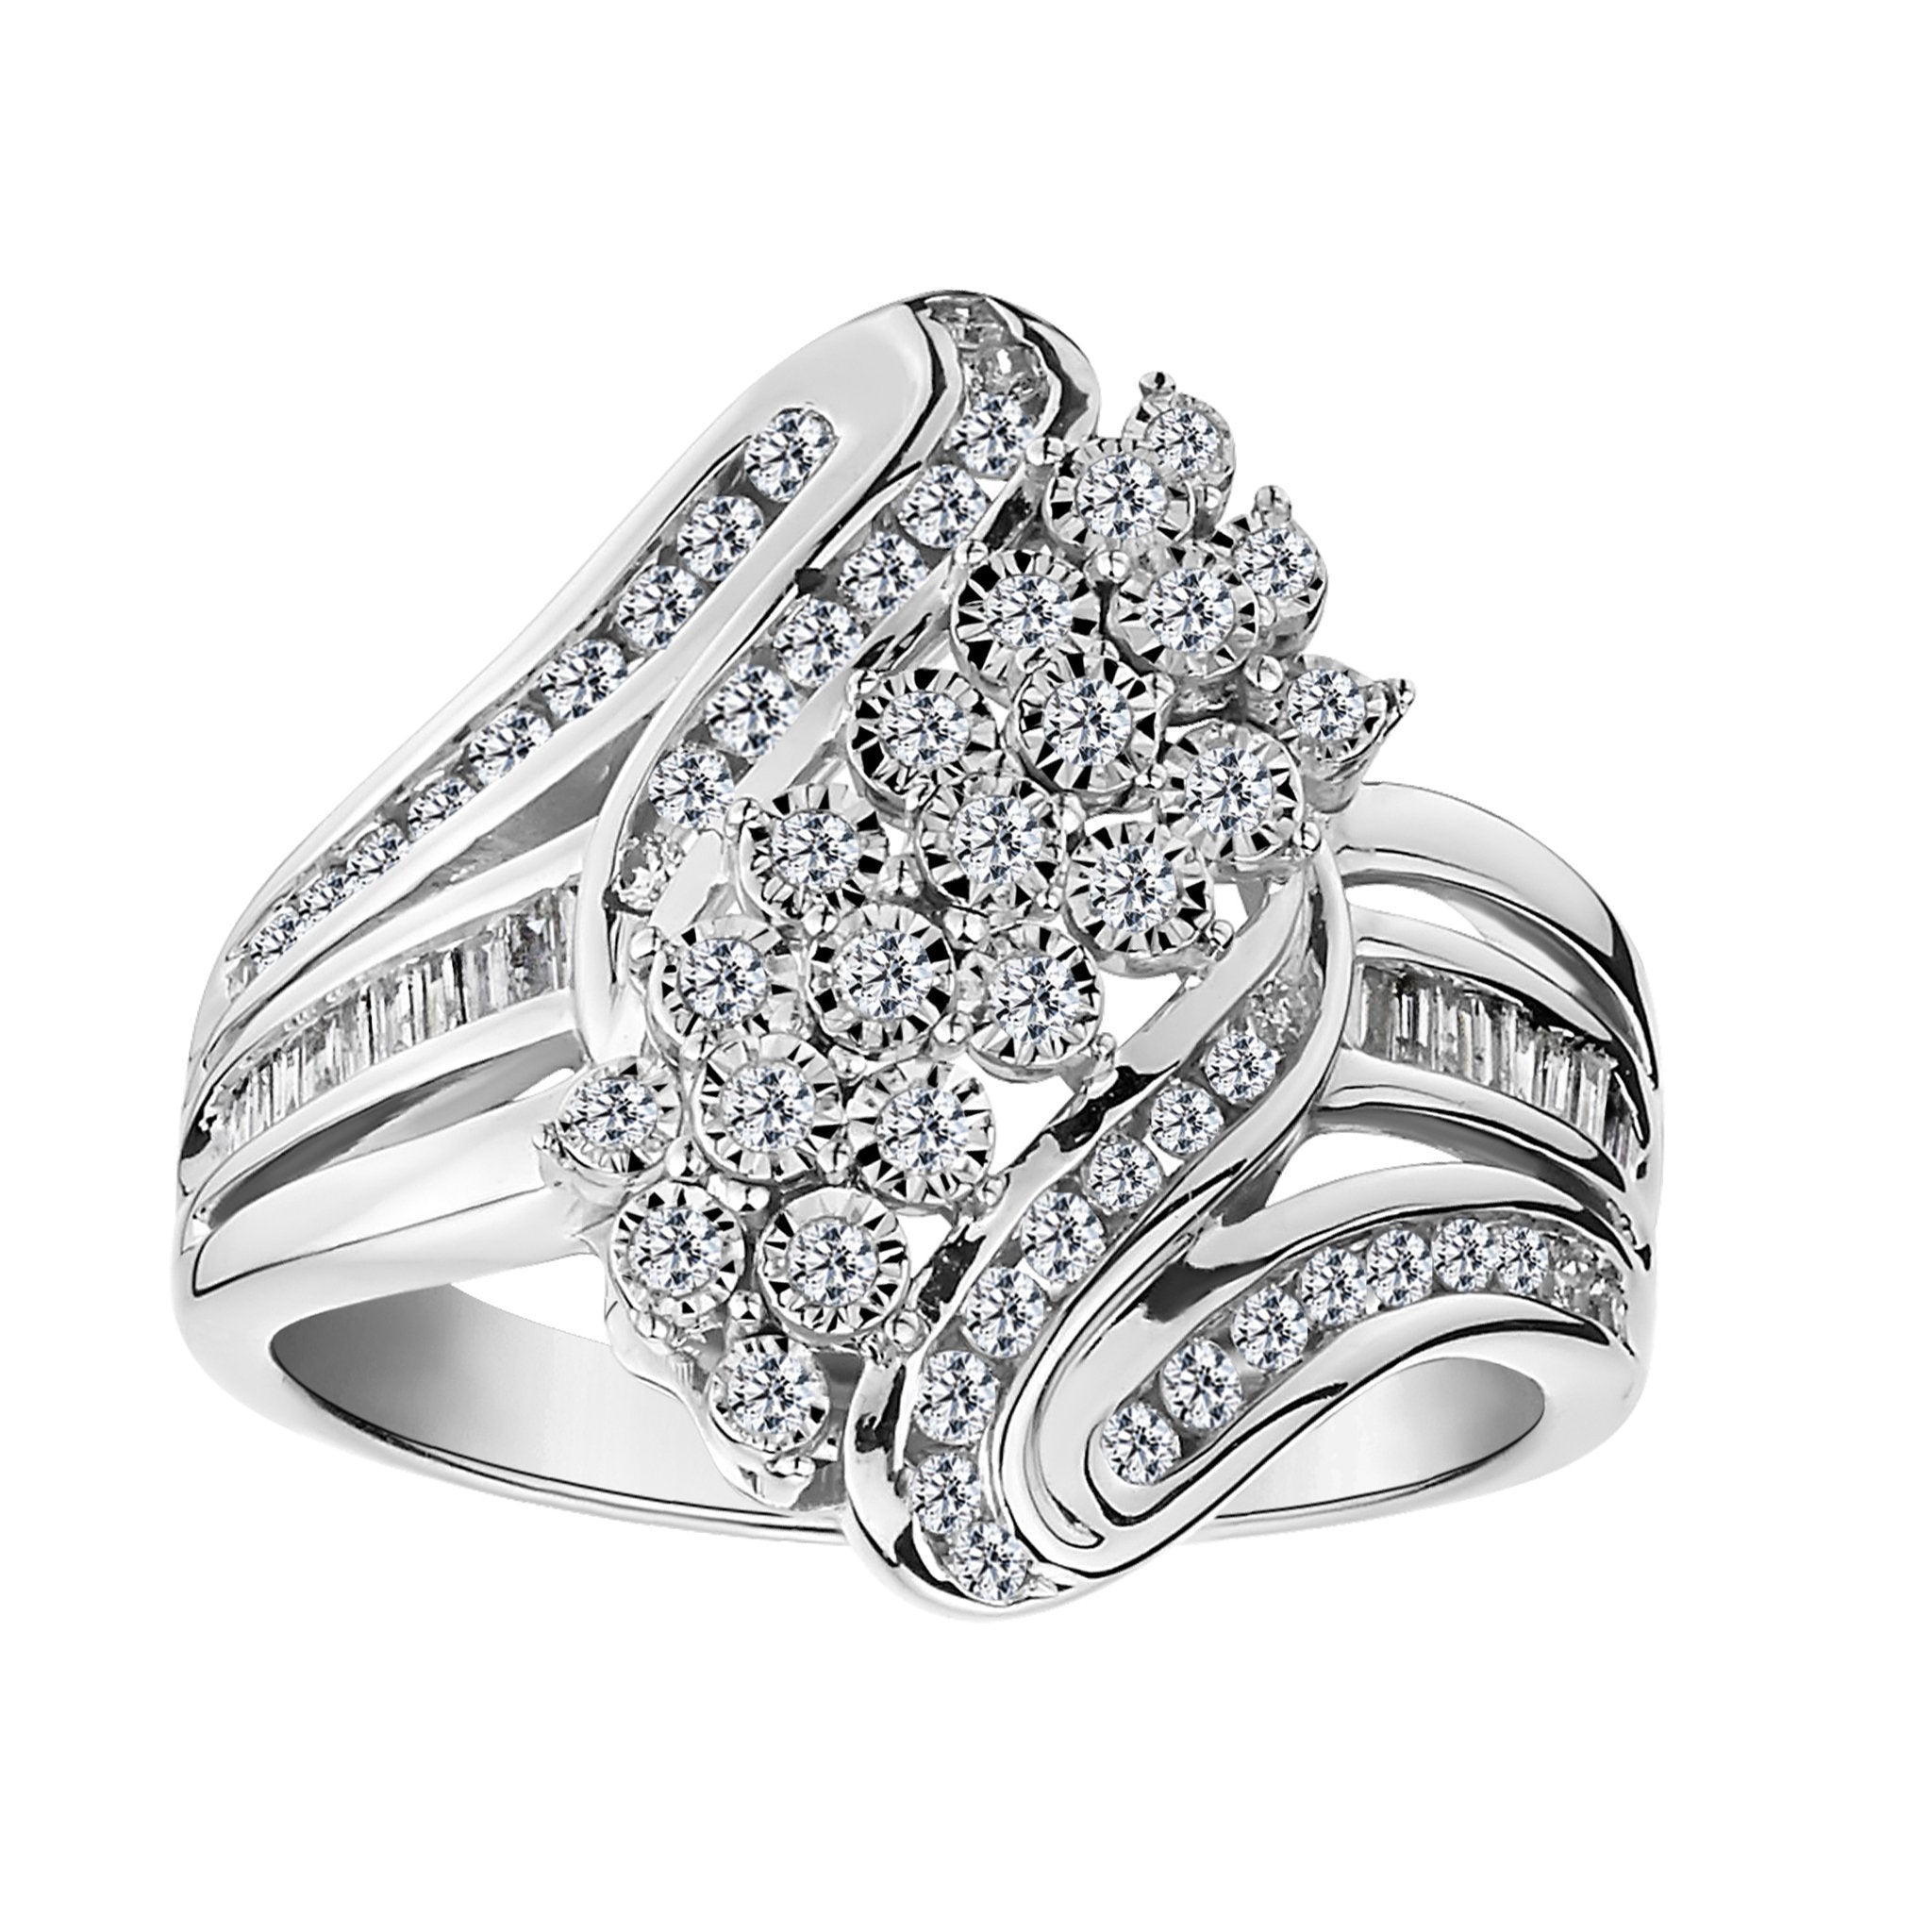 .50 Carat Diamond "Waterfall" Ring,  10kt White Gold. Fashion Rings. Griffin Jewellery Designs